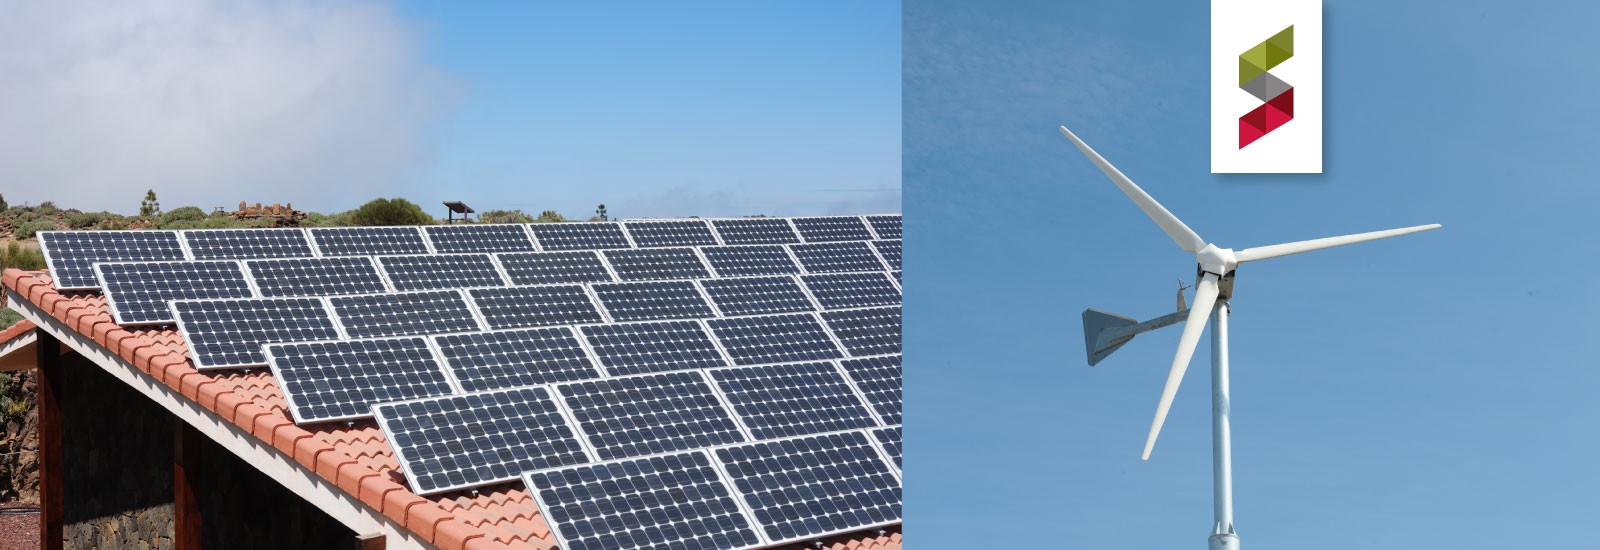 picture of solar panels on left; picture of wind turbine on right